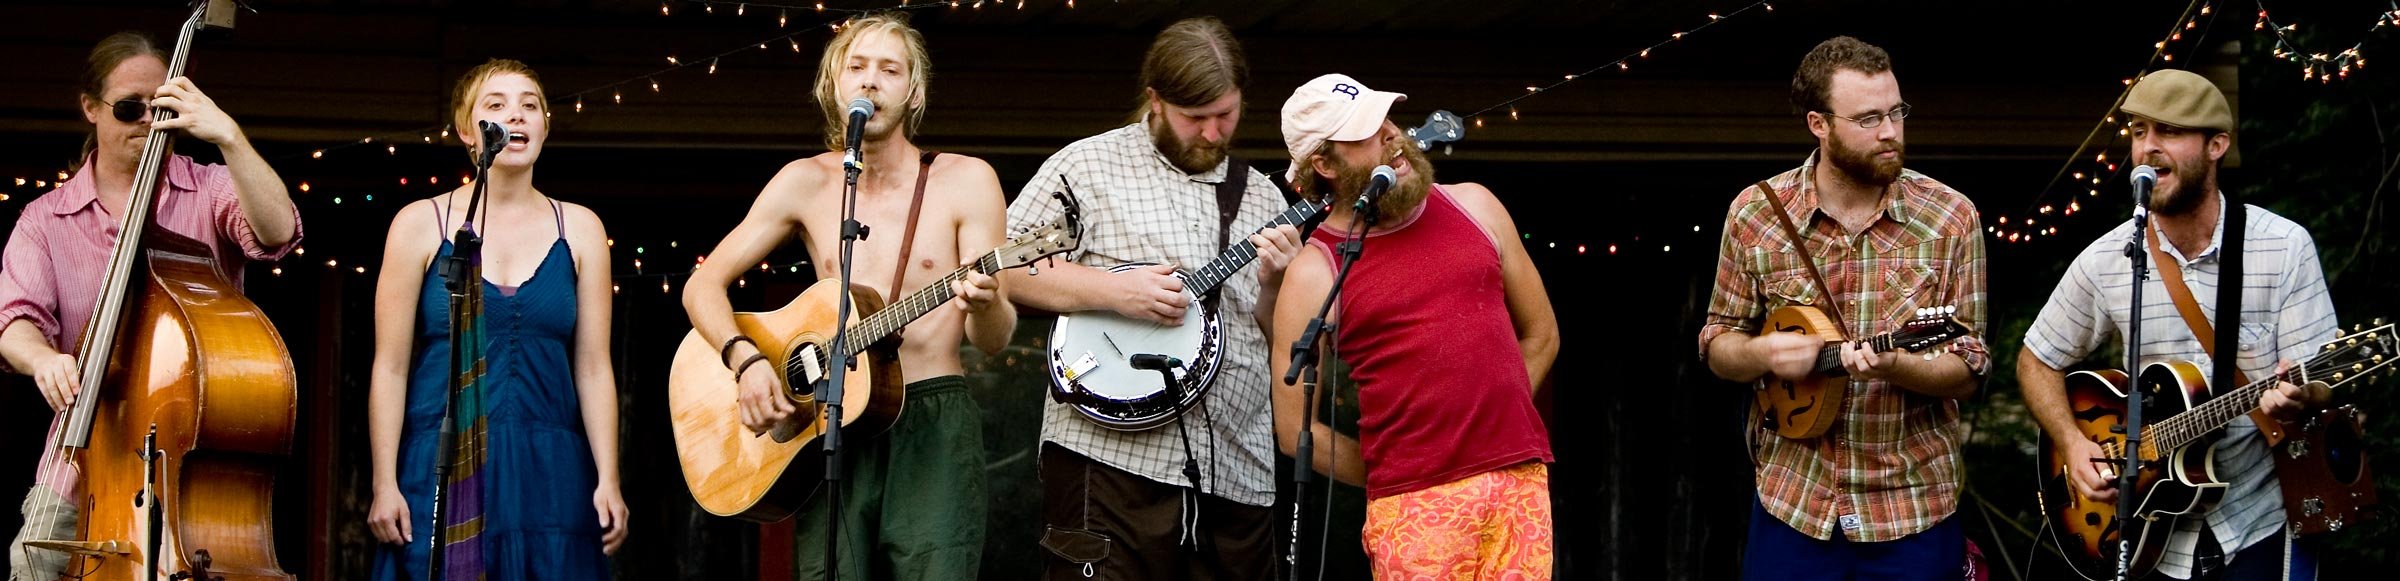 Bonnie Prince Billy and the Picket Line perform a private concert to 300 people